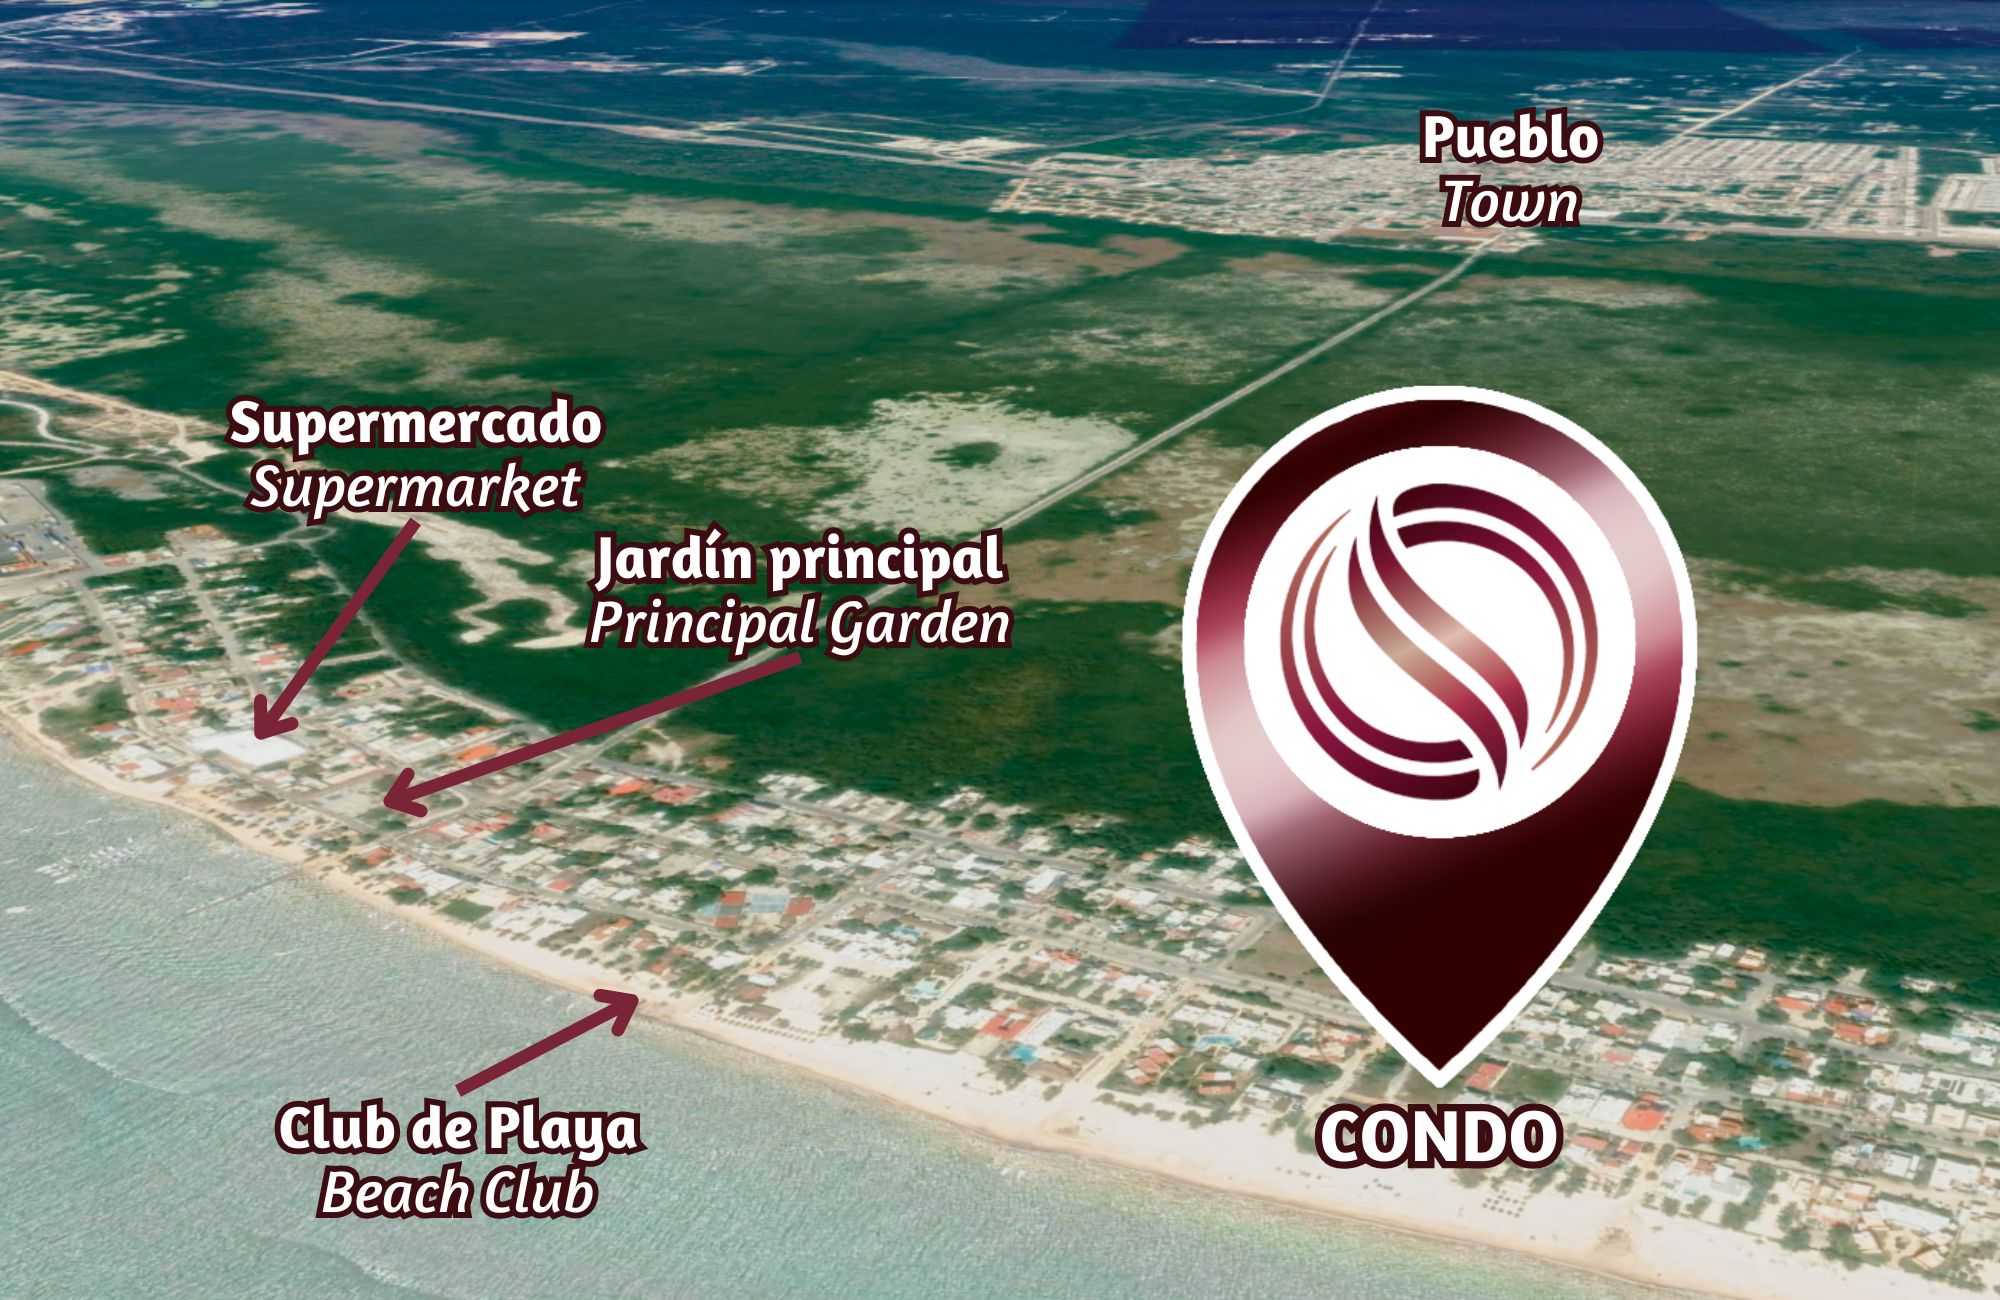 Apartment with terrace, beach access, pet-friendly, for sale in Puerto Morelos.